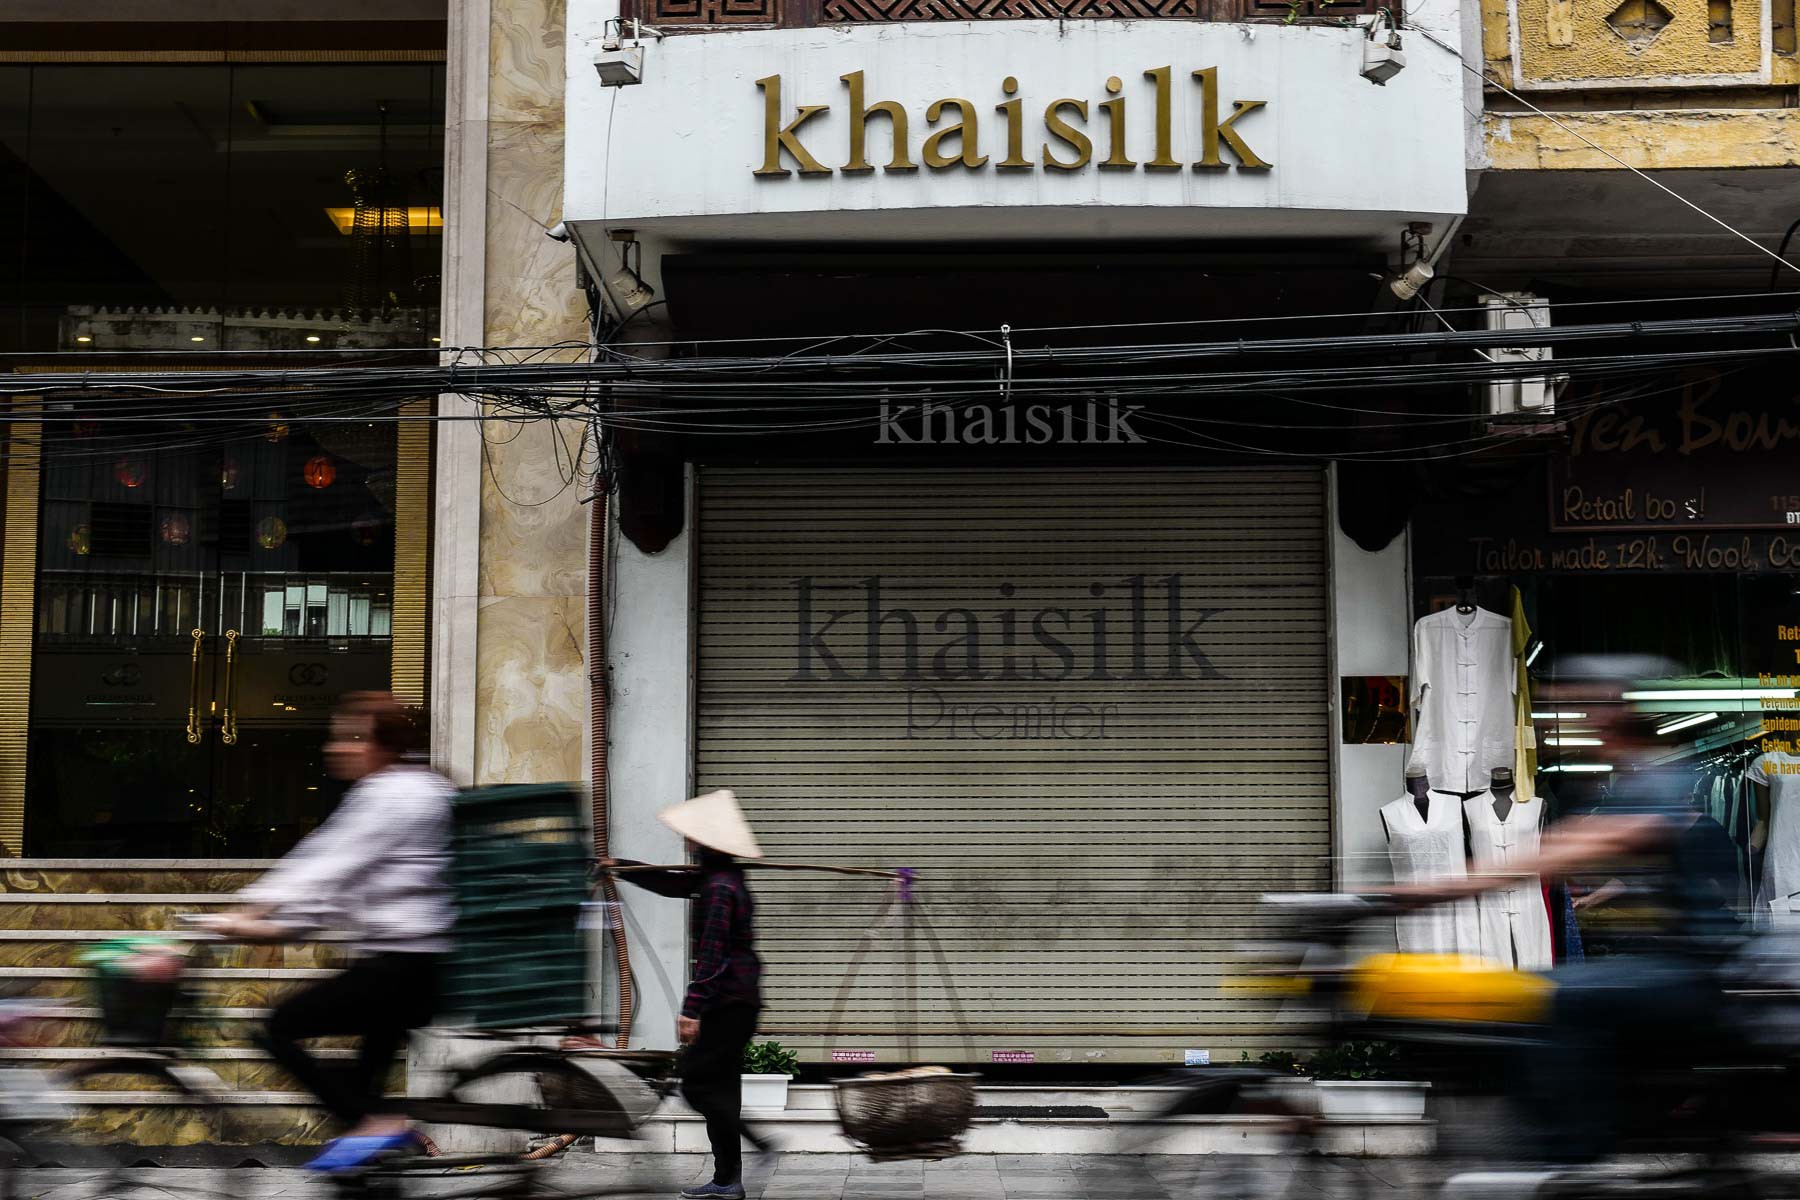 Vietnam police poised to investigate Khaisilk's 'Made in China